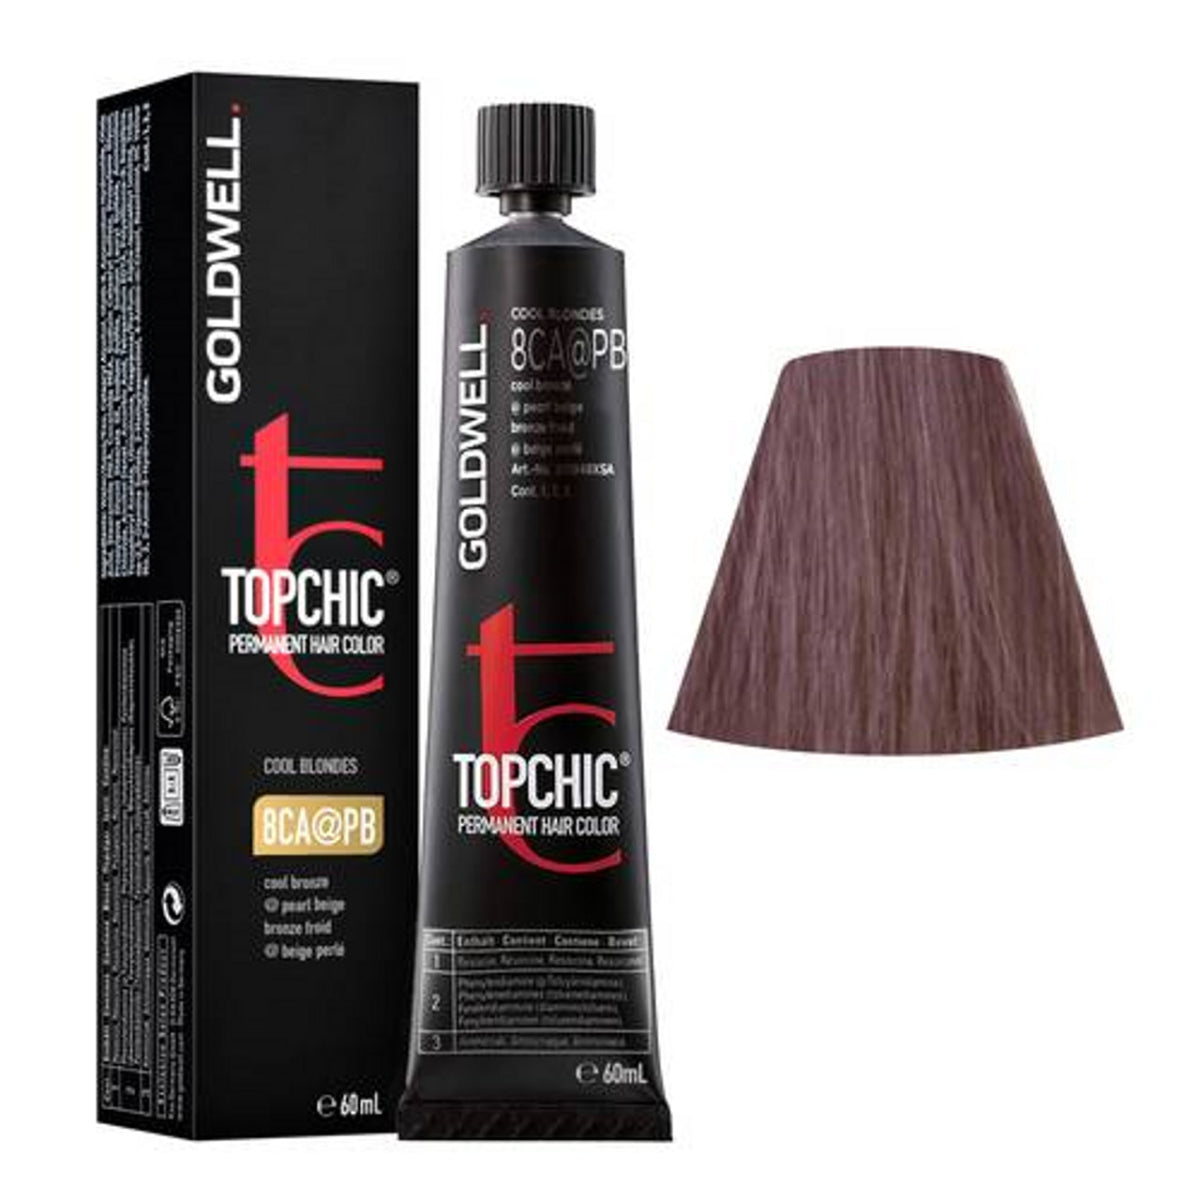 Goldwell Topchic Tube 60ml - MORE COLOURS - Southwestsix Cosmetics Goldwell Topchic Tube 60ml - MORE COLOURS - Hair Dyes Goldwell Southwestsix Cosmetics 8CA@PB Goldwell Topchic Tube 60ml - MORE COLOURS -